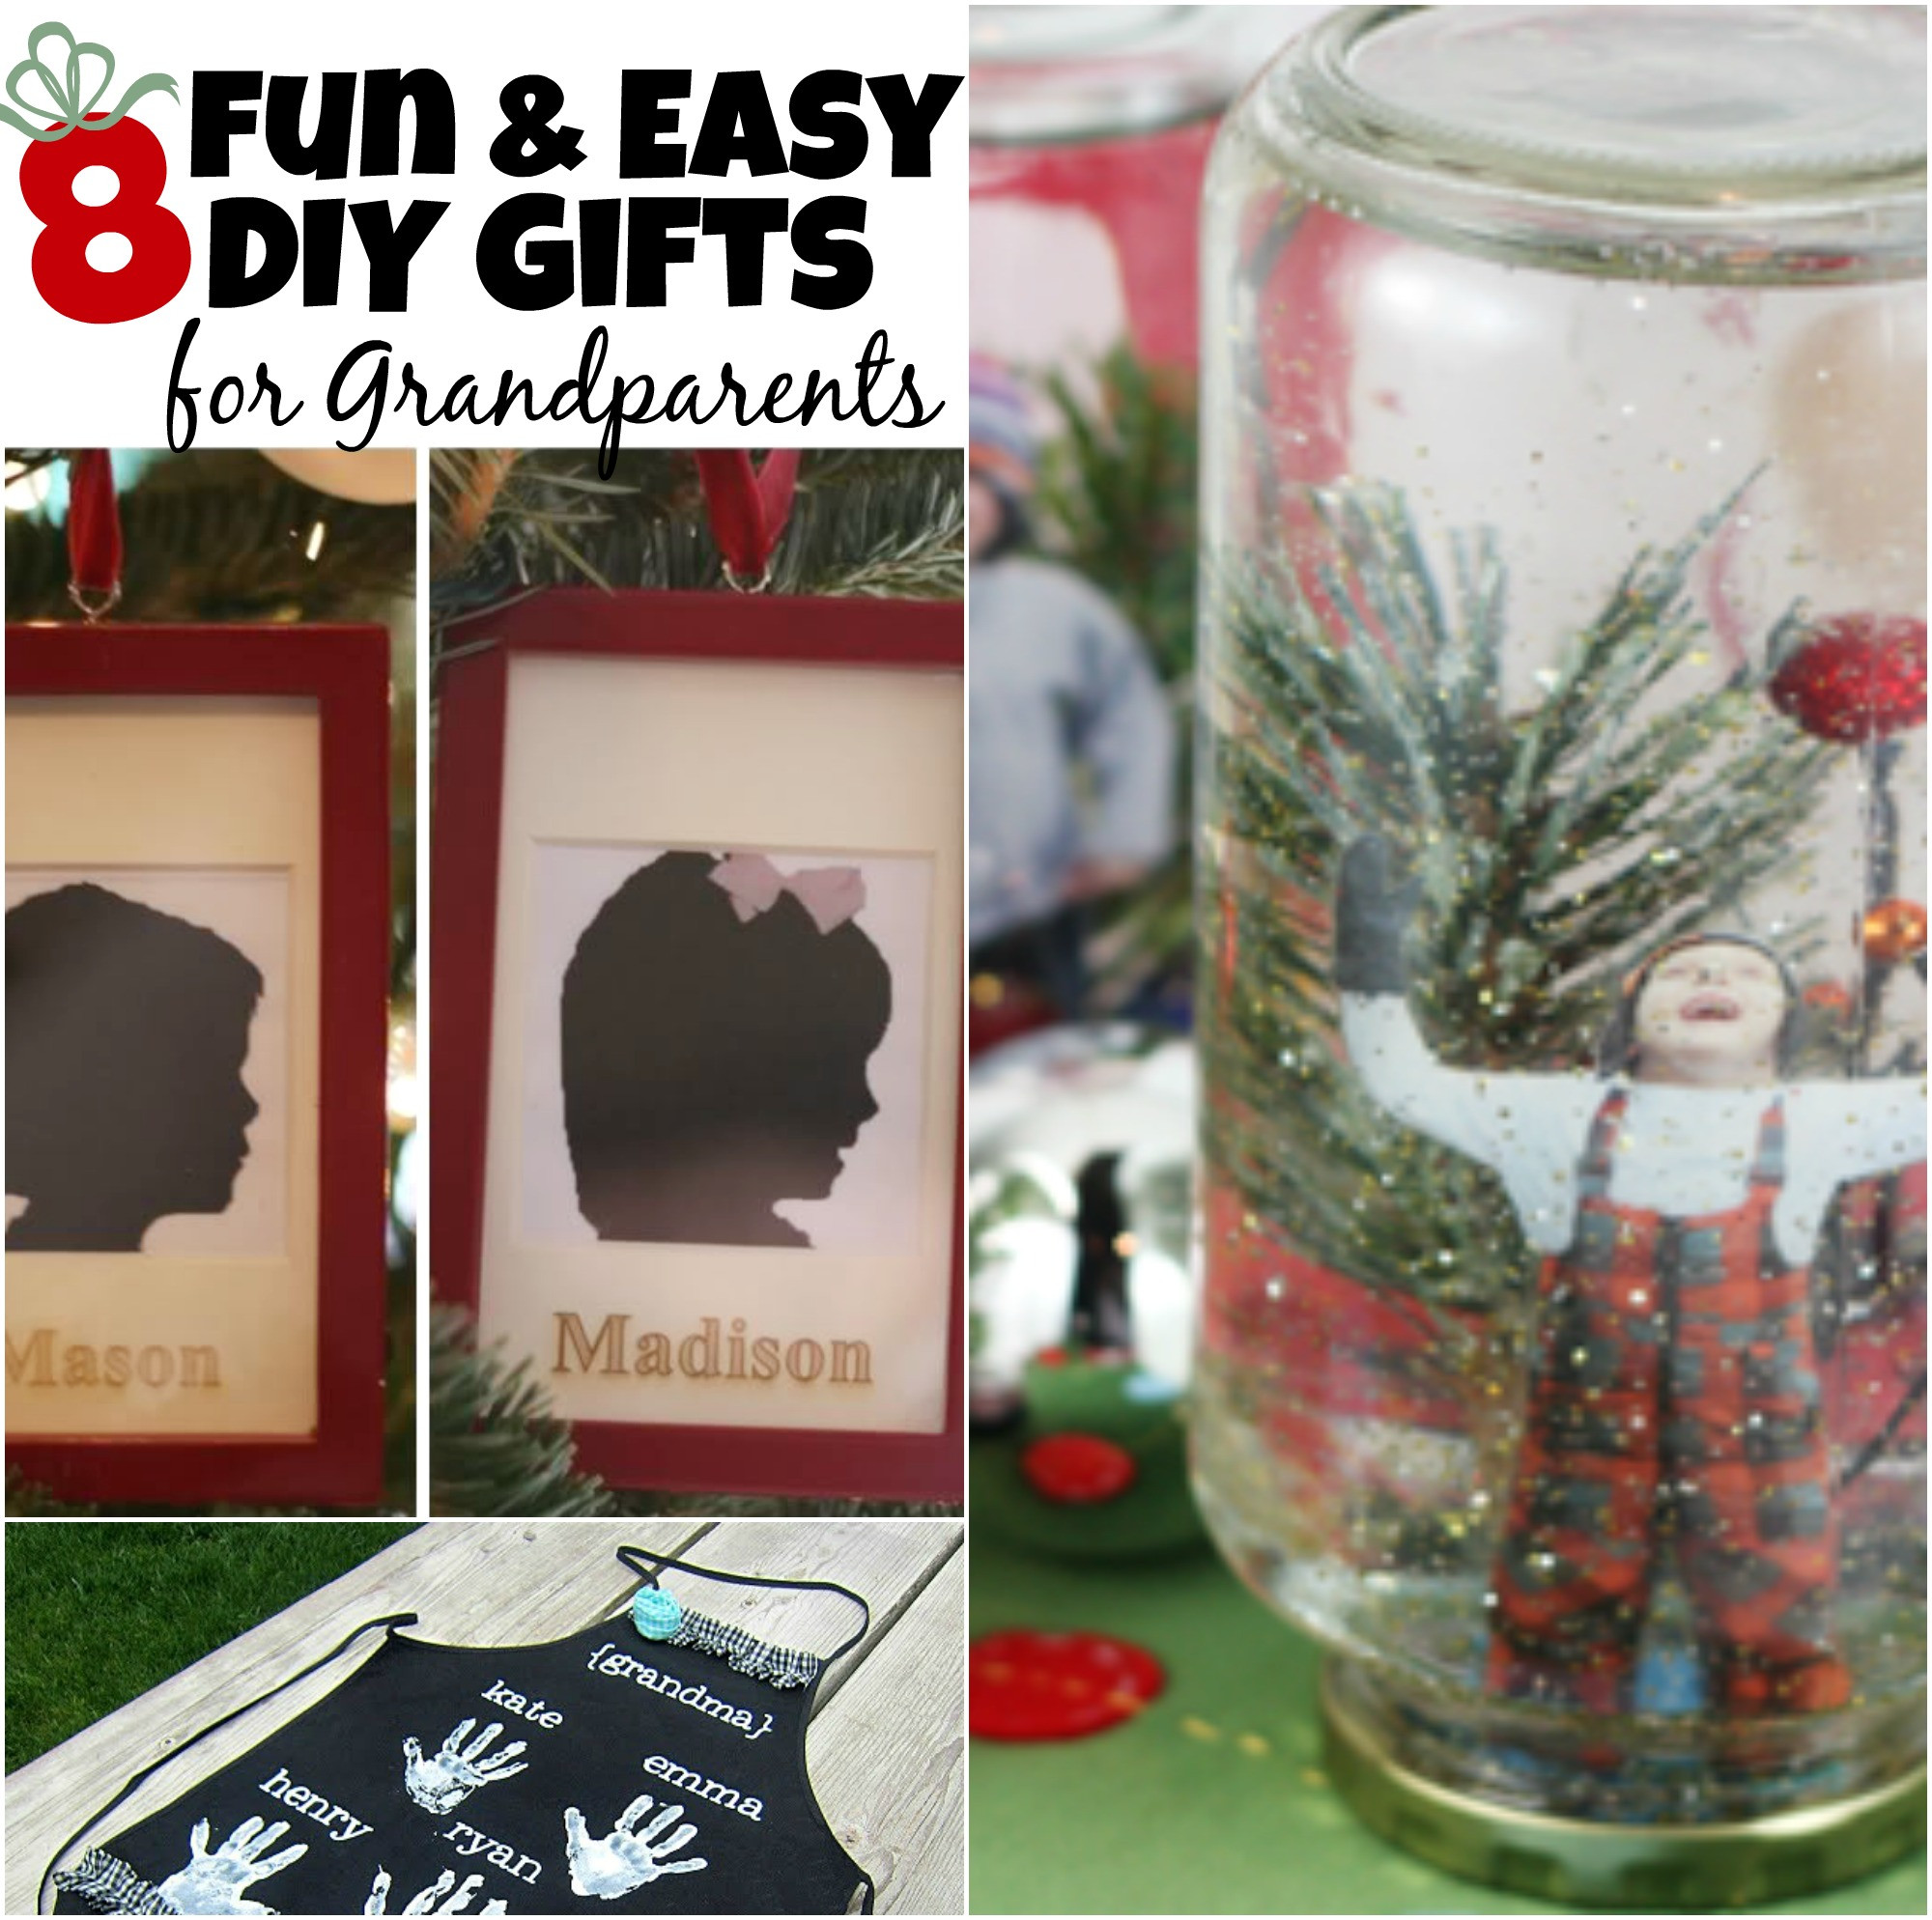 DIY Grandparent Gifts
 8 DIY Gifts for Grandparents The Realistic Mama